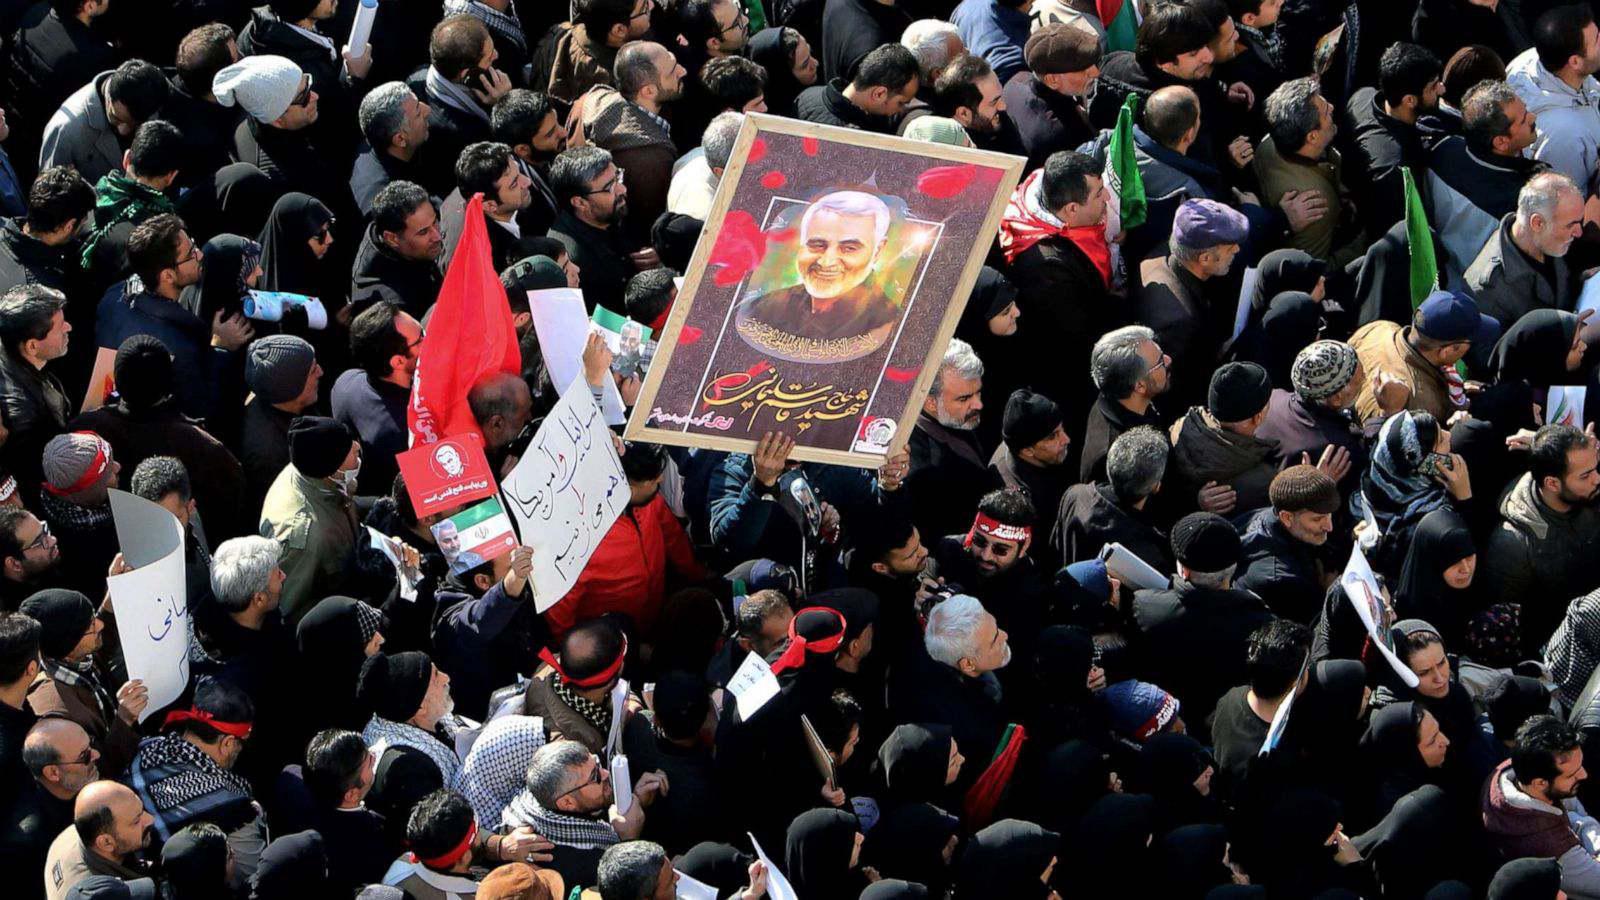 ifmat - Iranian national who gathered intel on Soleimani sentenced to death